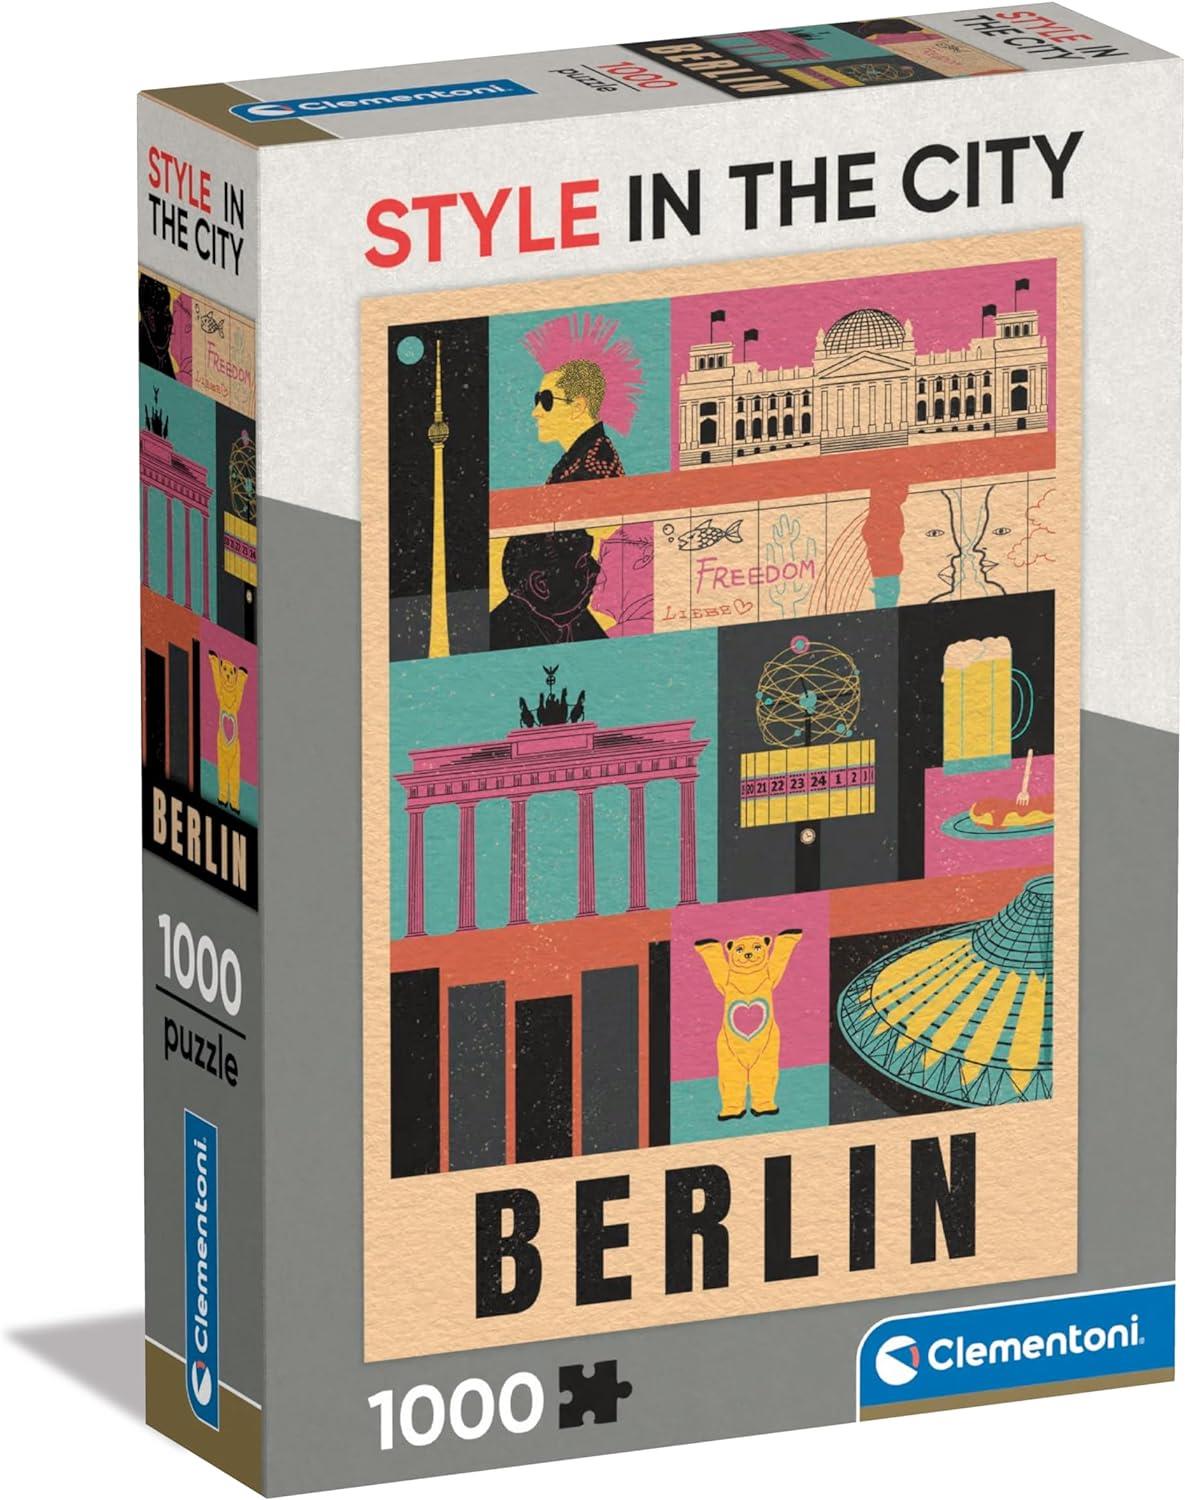 Clementoni Style In The City Berlin Jigsaw Puzzle (1000 Pieces)